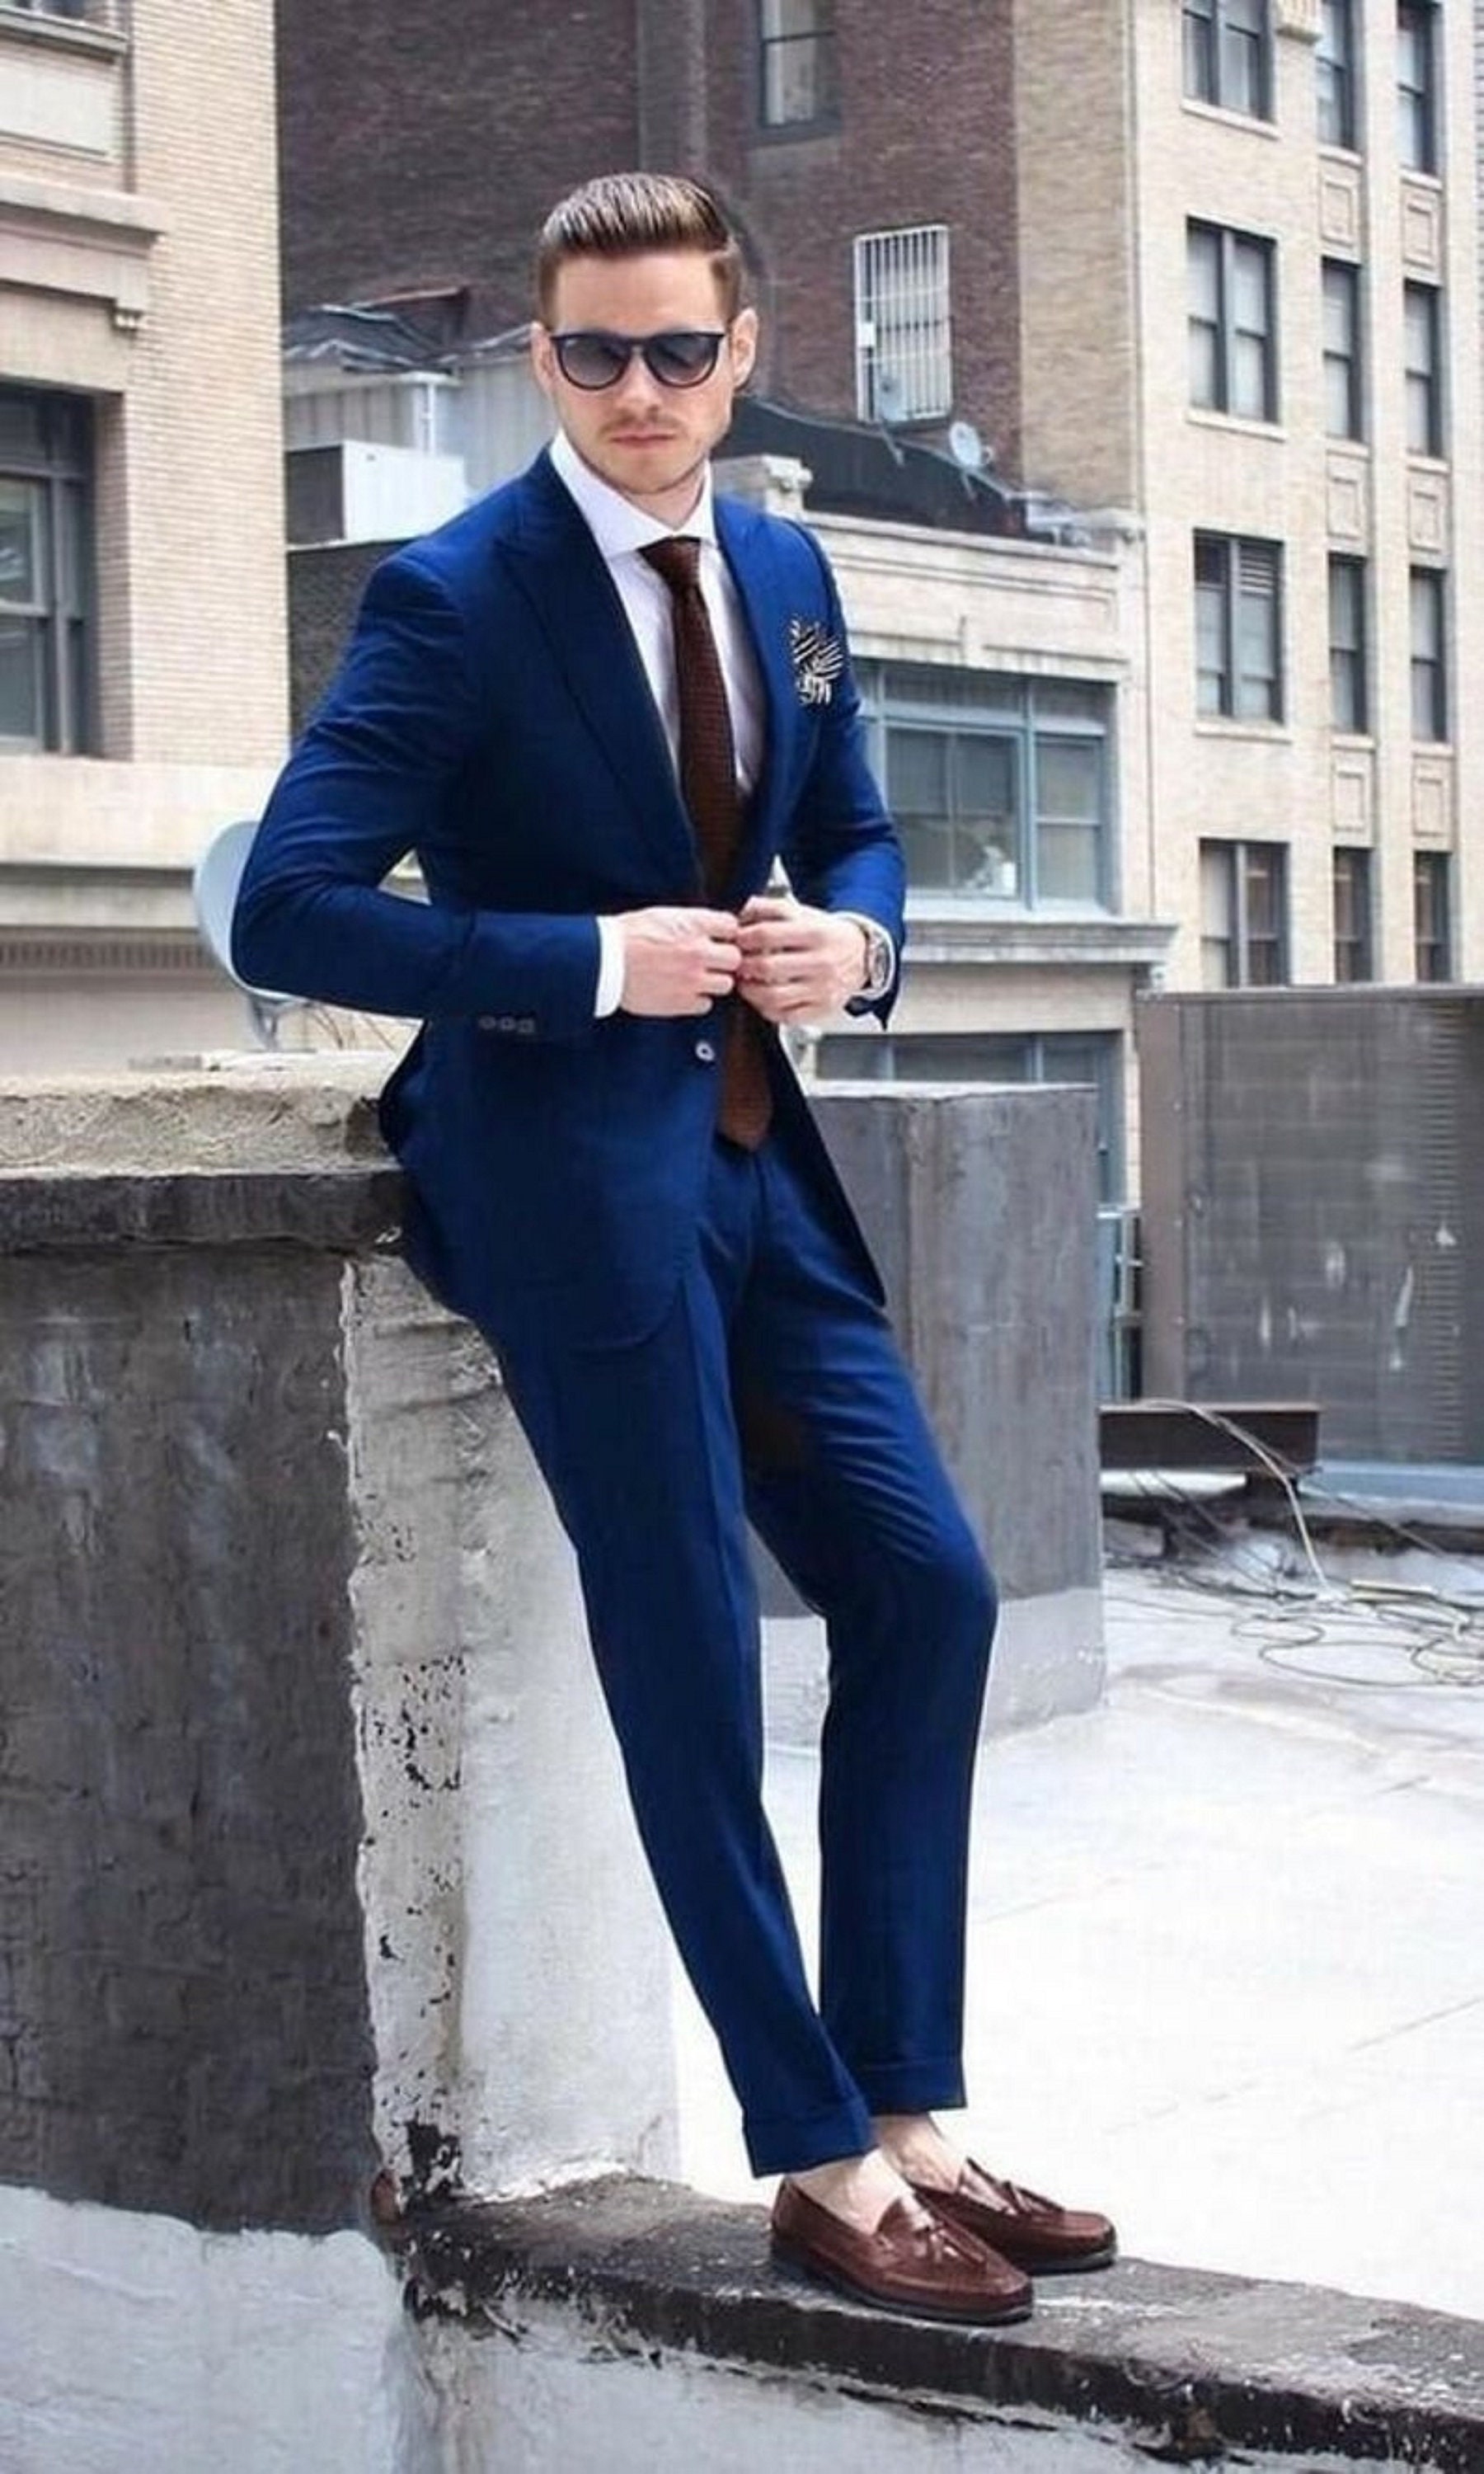 Buy Blue Check Formal Suit Trousers for Men Online at SELECTED  HOMME|278312601